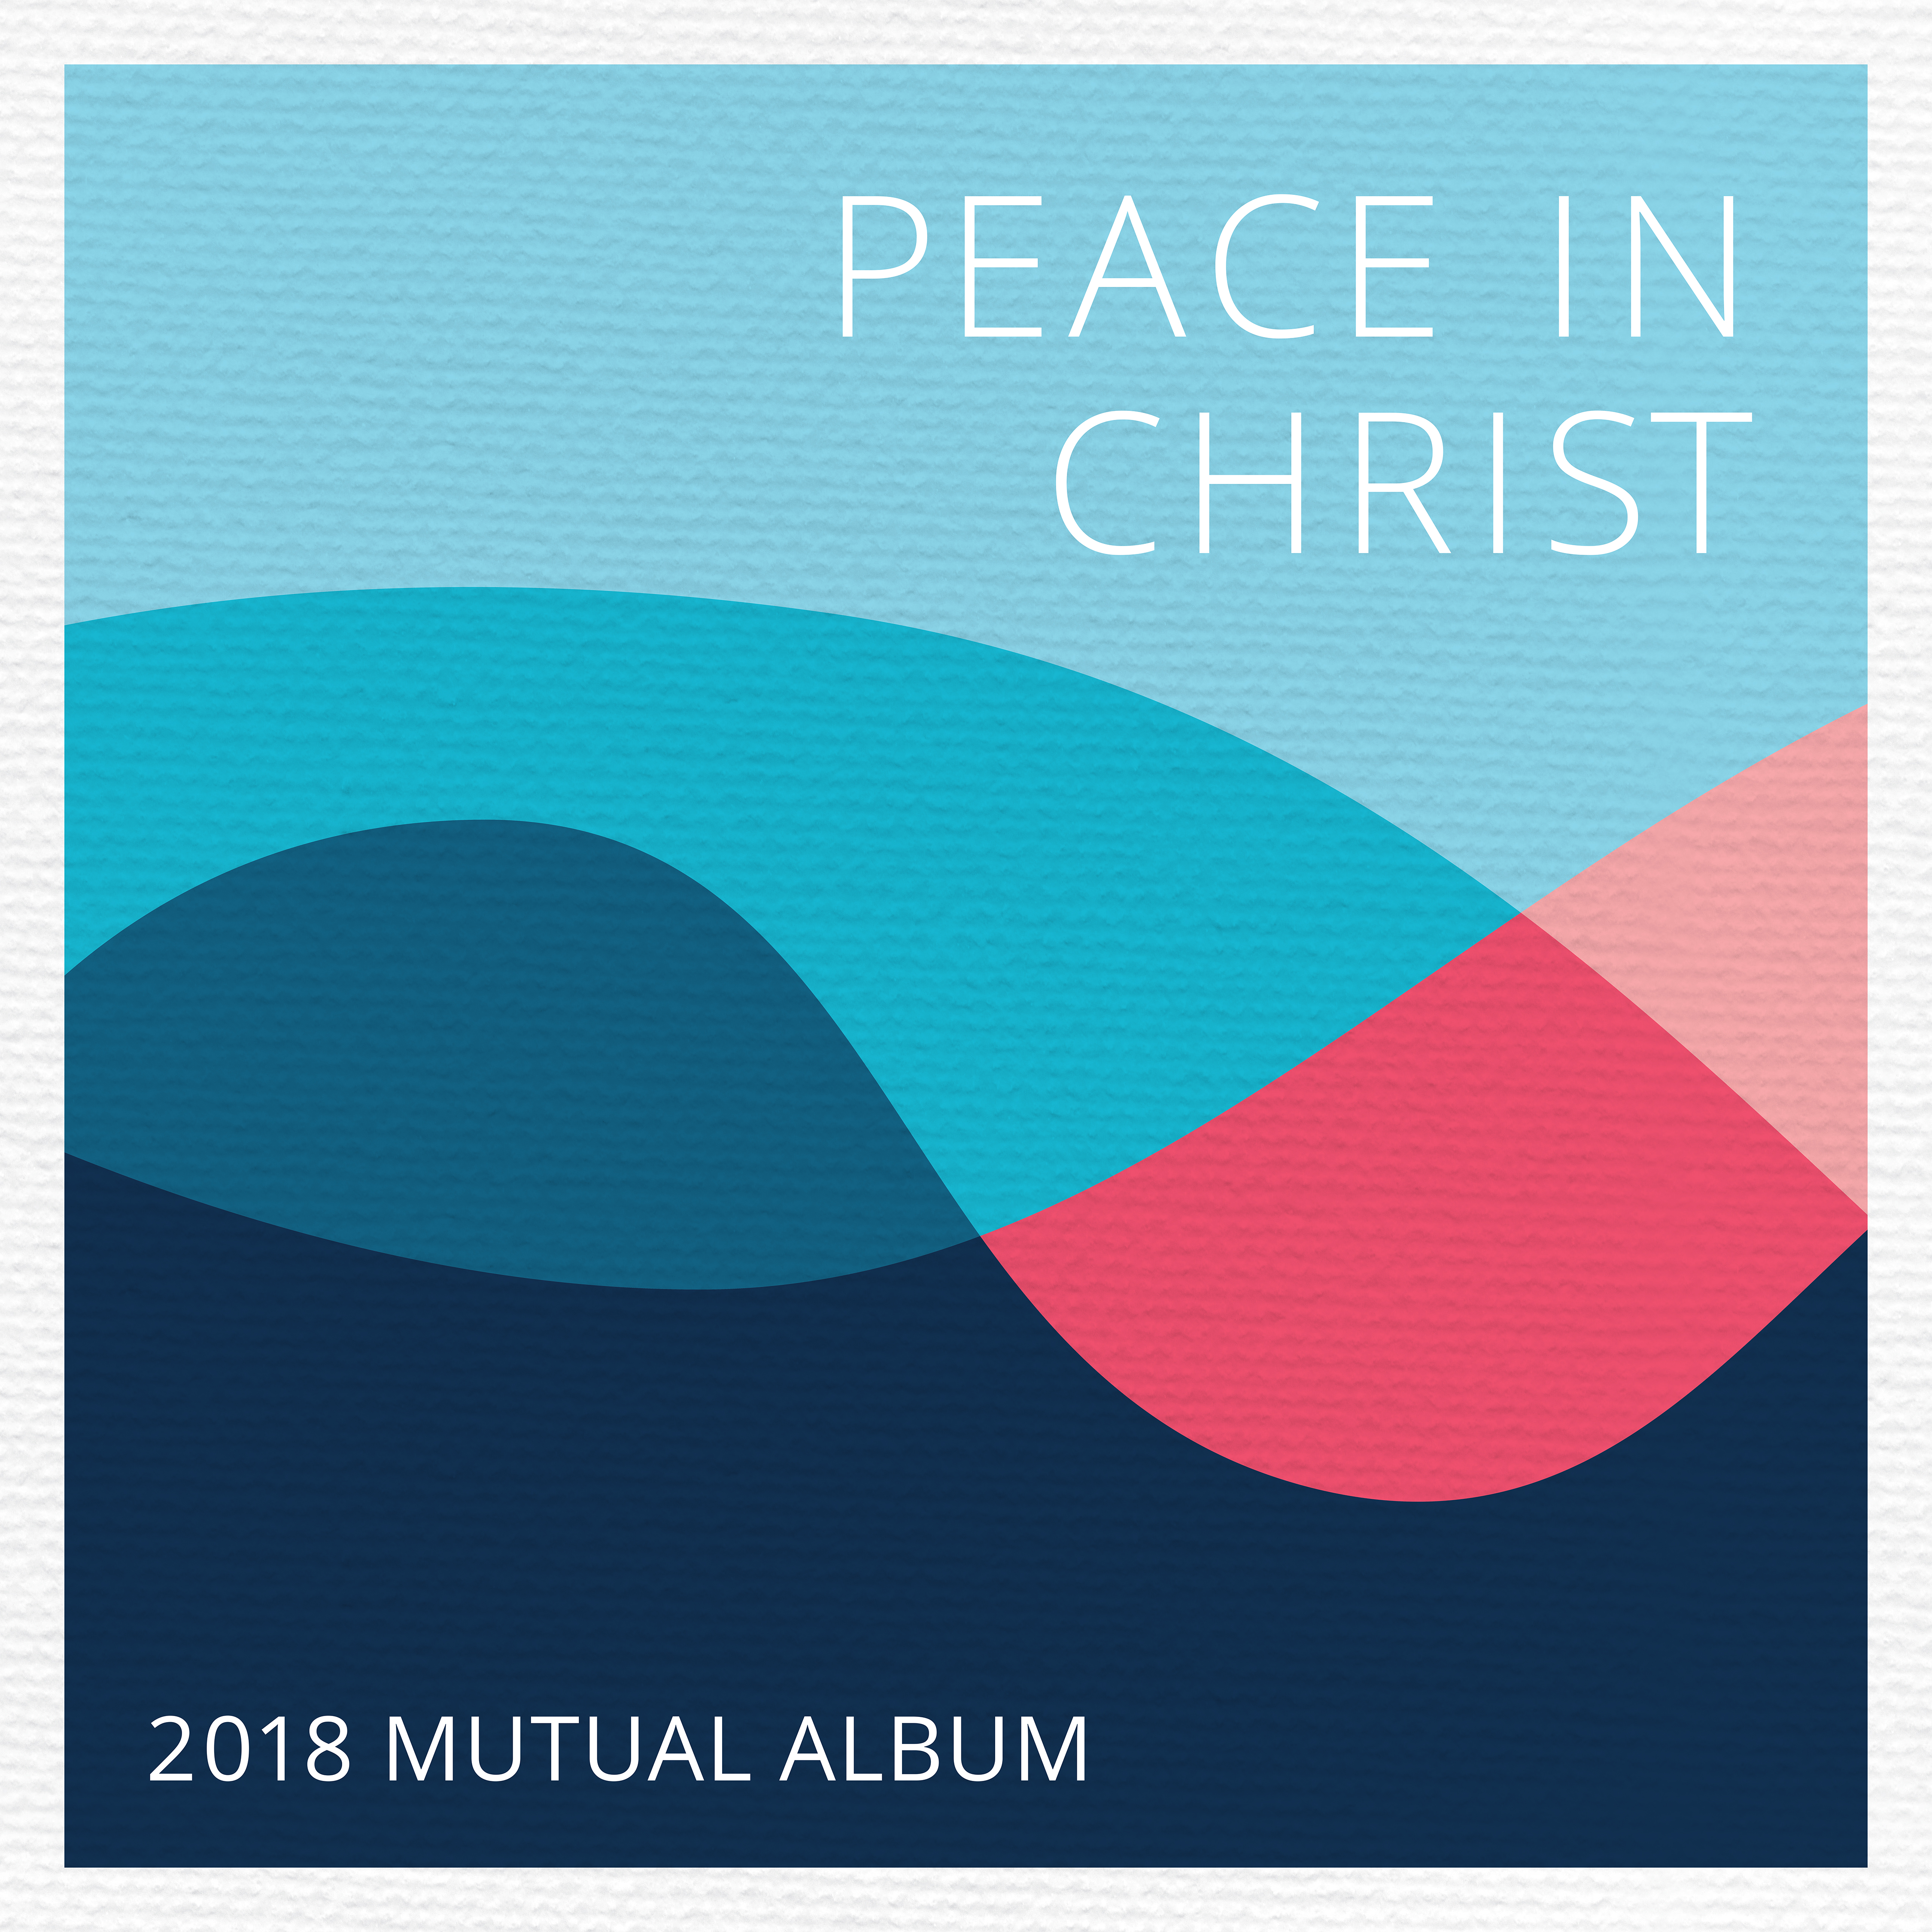 Audio recording of the song "Peace in Christ: 2018 Mutual Theme Album Cover Art."